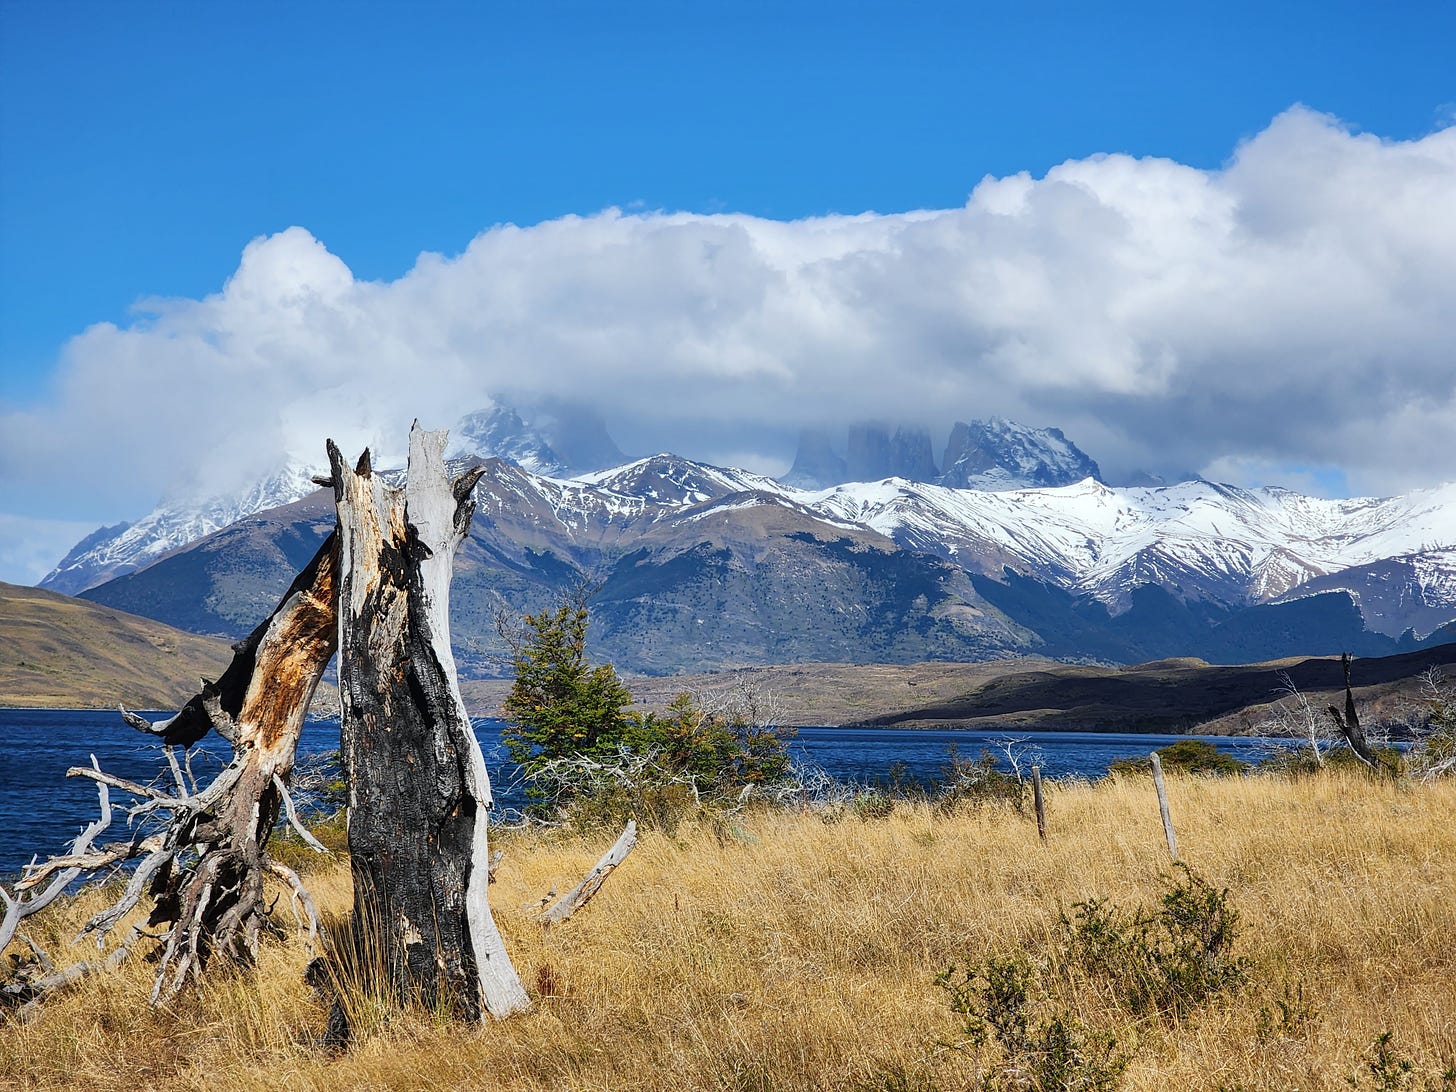 A twisted, burned tree in front of a sweeping mountain vista at Torres del Paine national park.